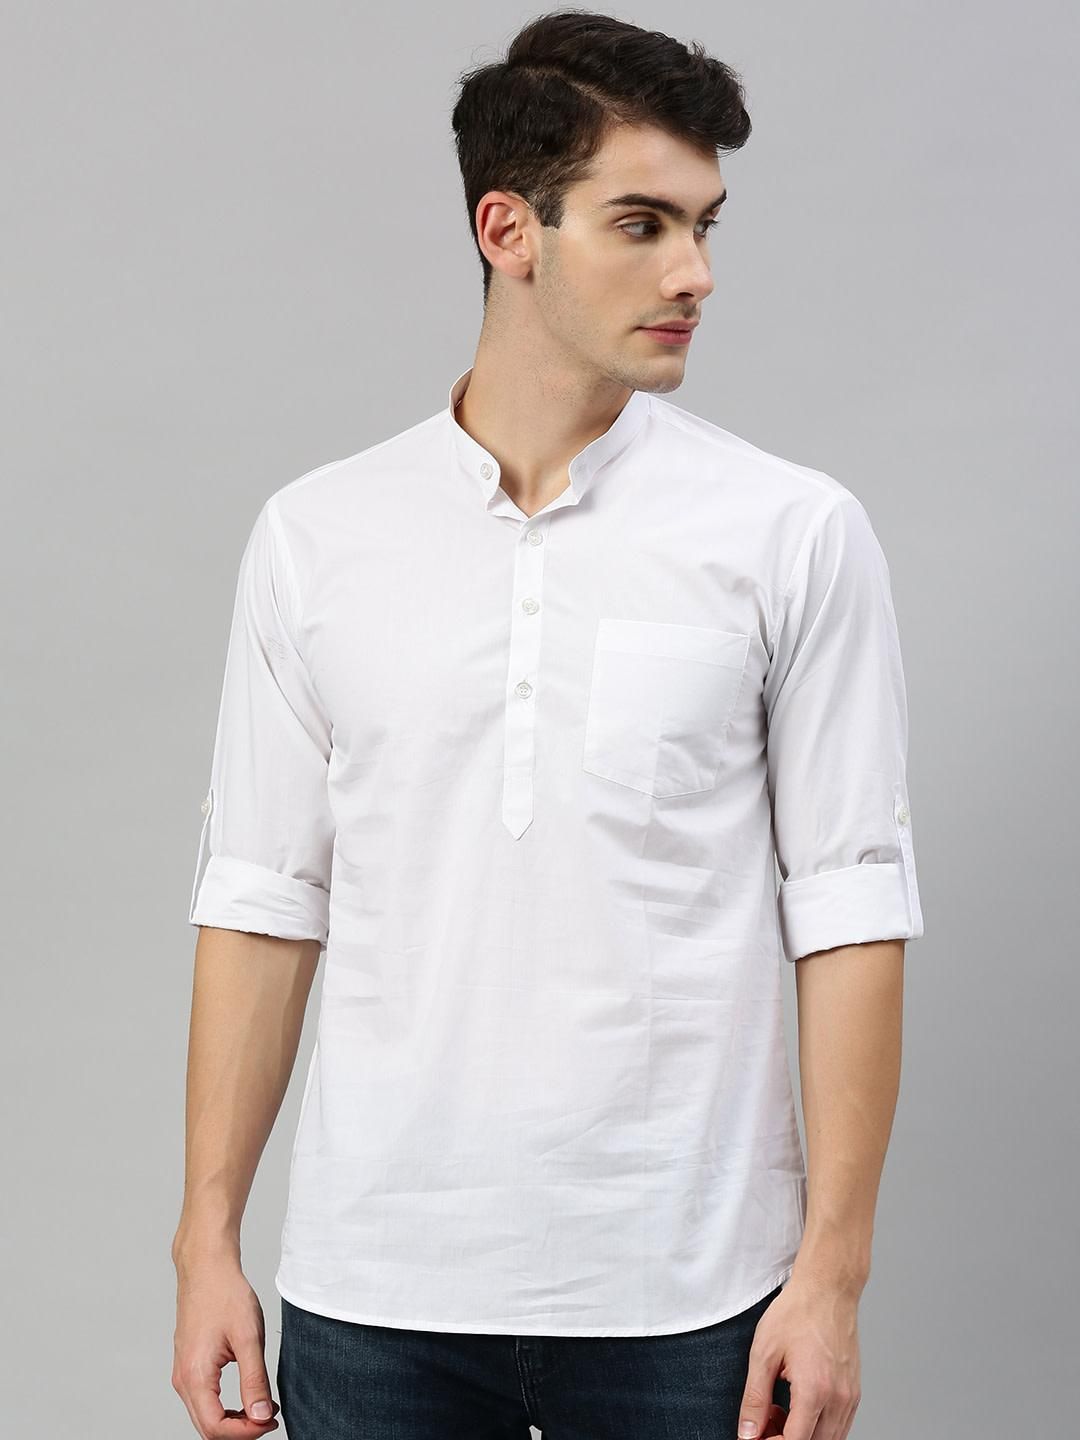 Buy Ketch White Solid A-Line Kurta for Women Online at Rs.444 - Ketch